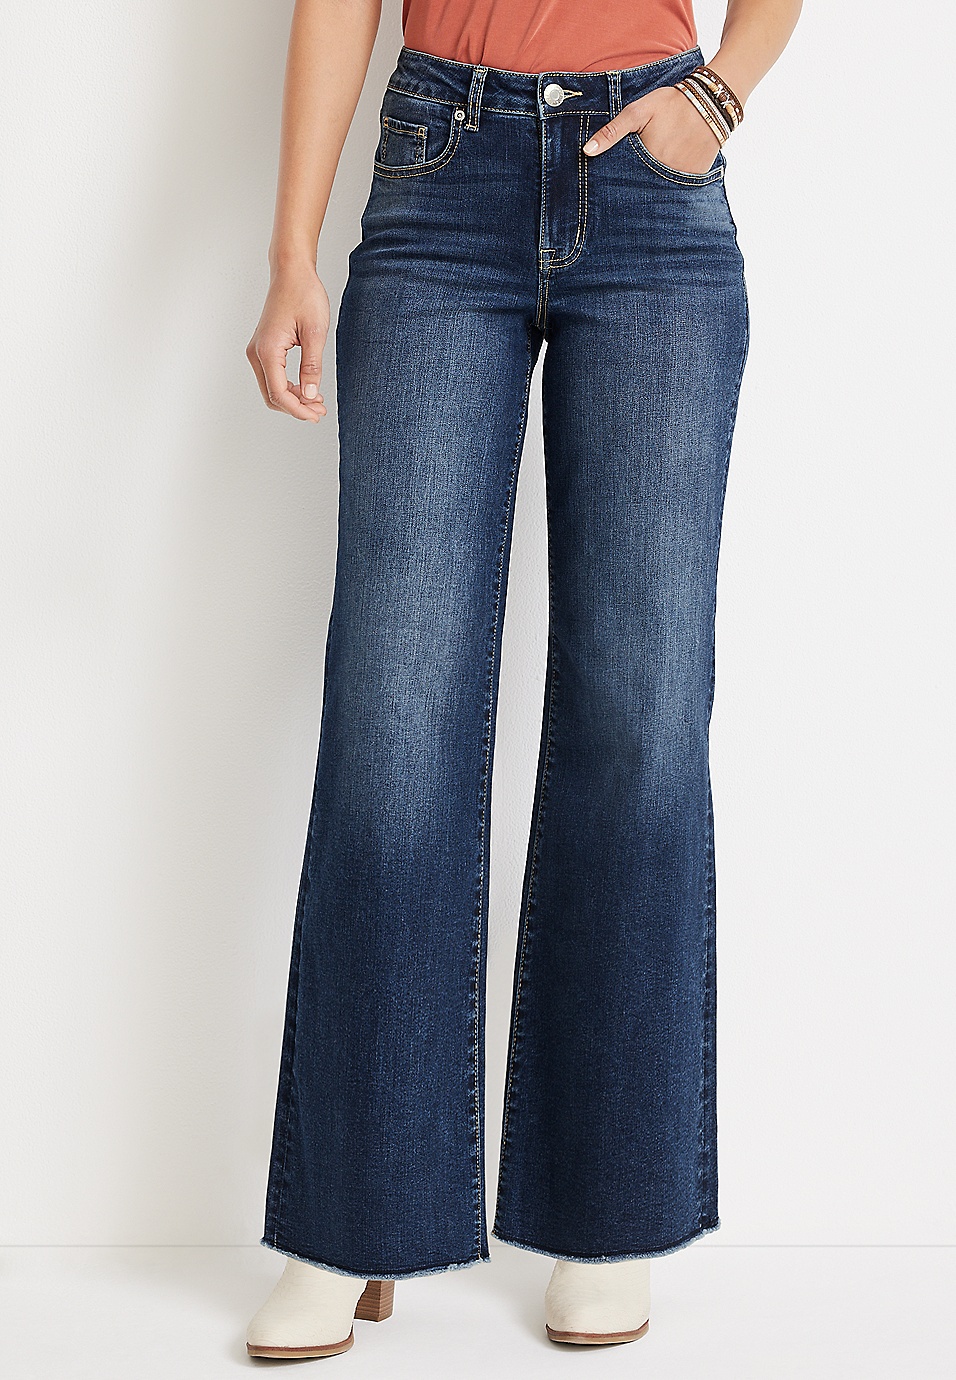 m jeans by maurices™ Wide Leg High Rise Frayed Hem Jean | maurices